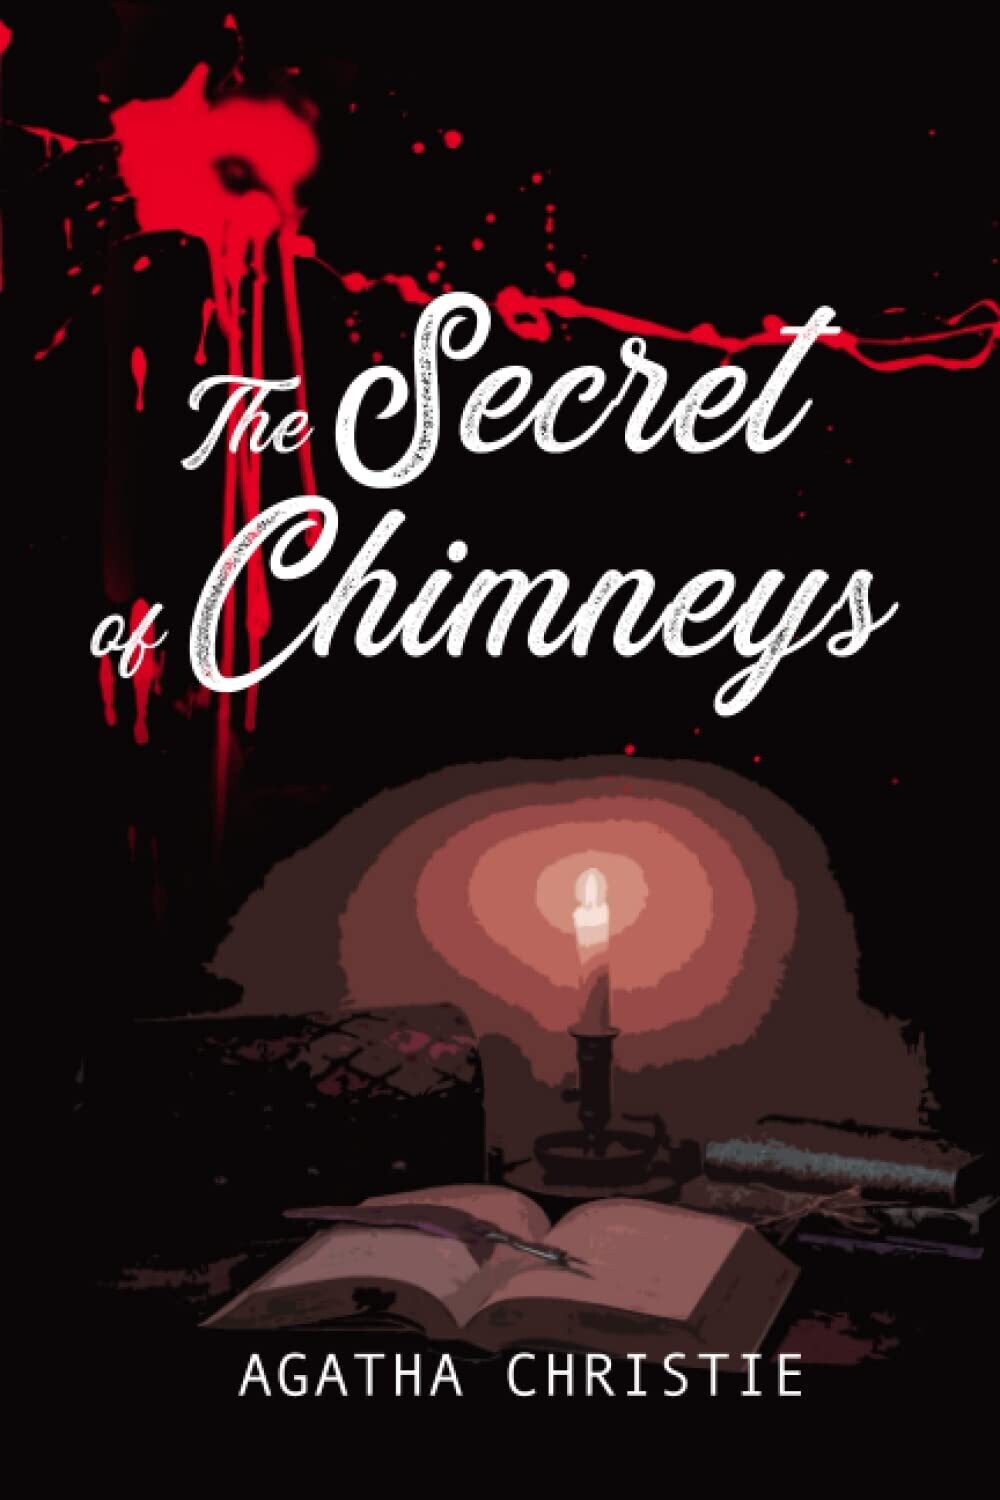 The Secret of Chimneys by Agatha Christie [Paperback] Book